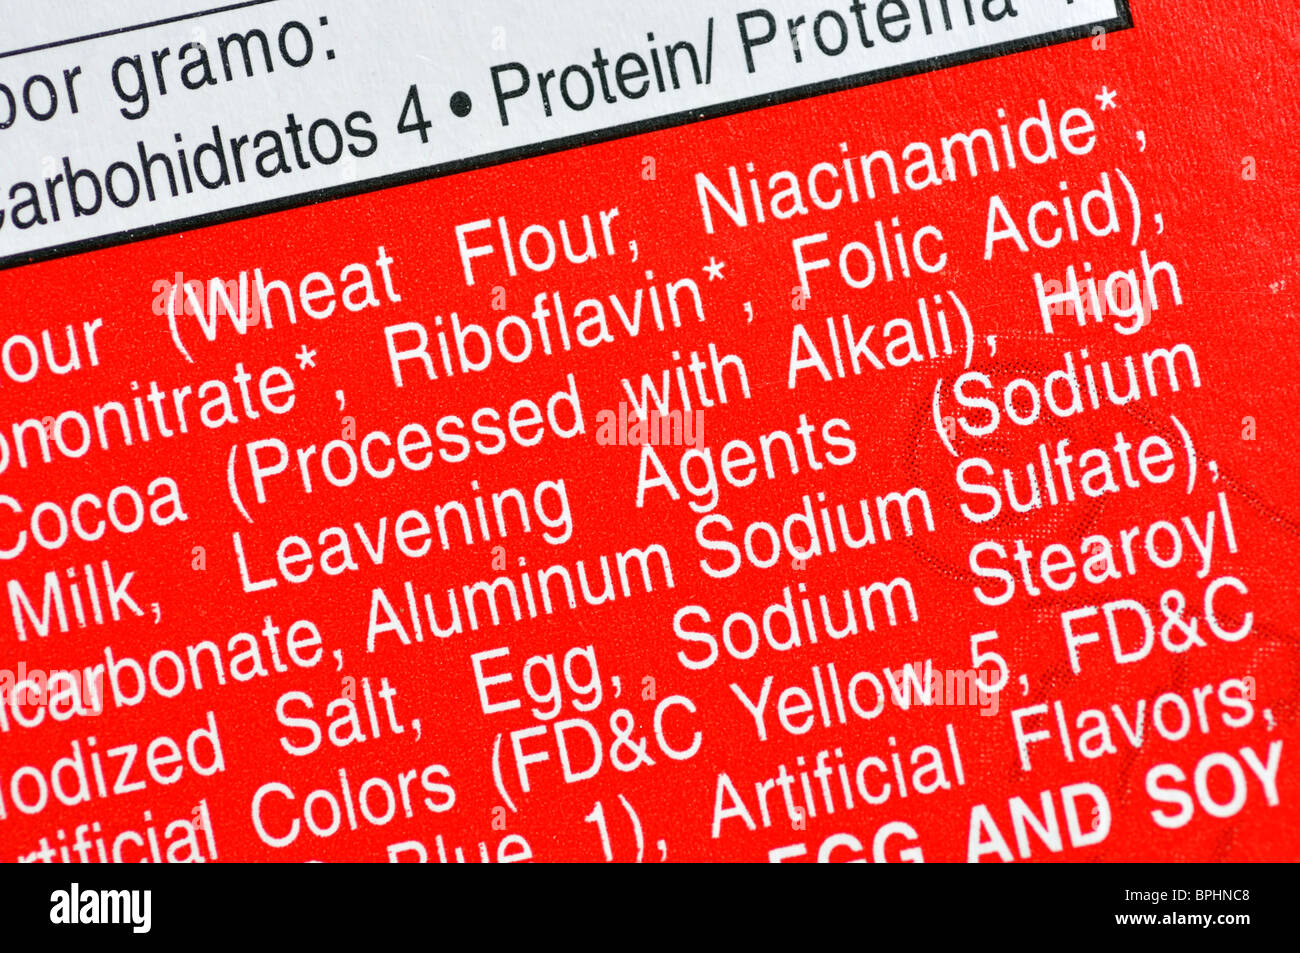 Nutrition information on food package Stock Photo